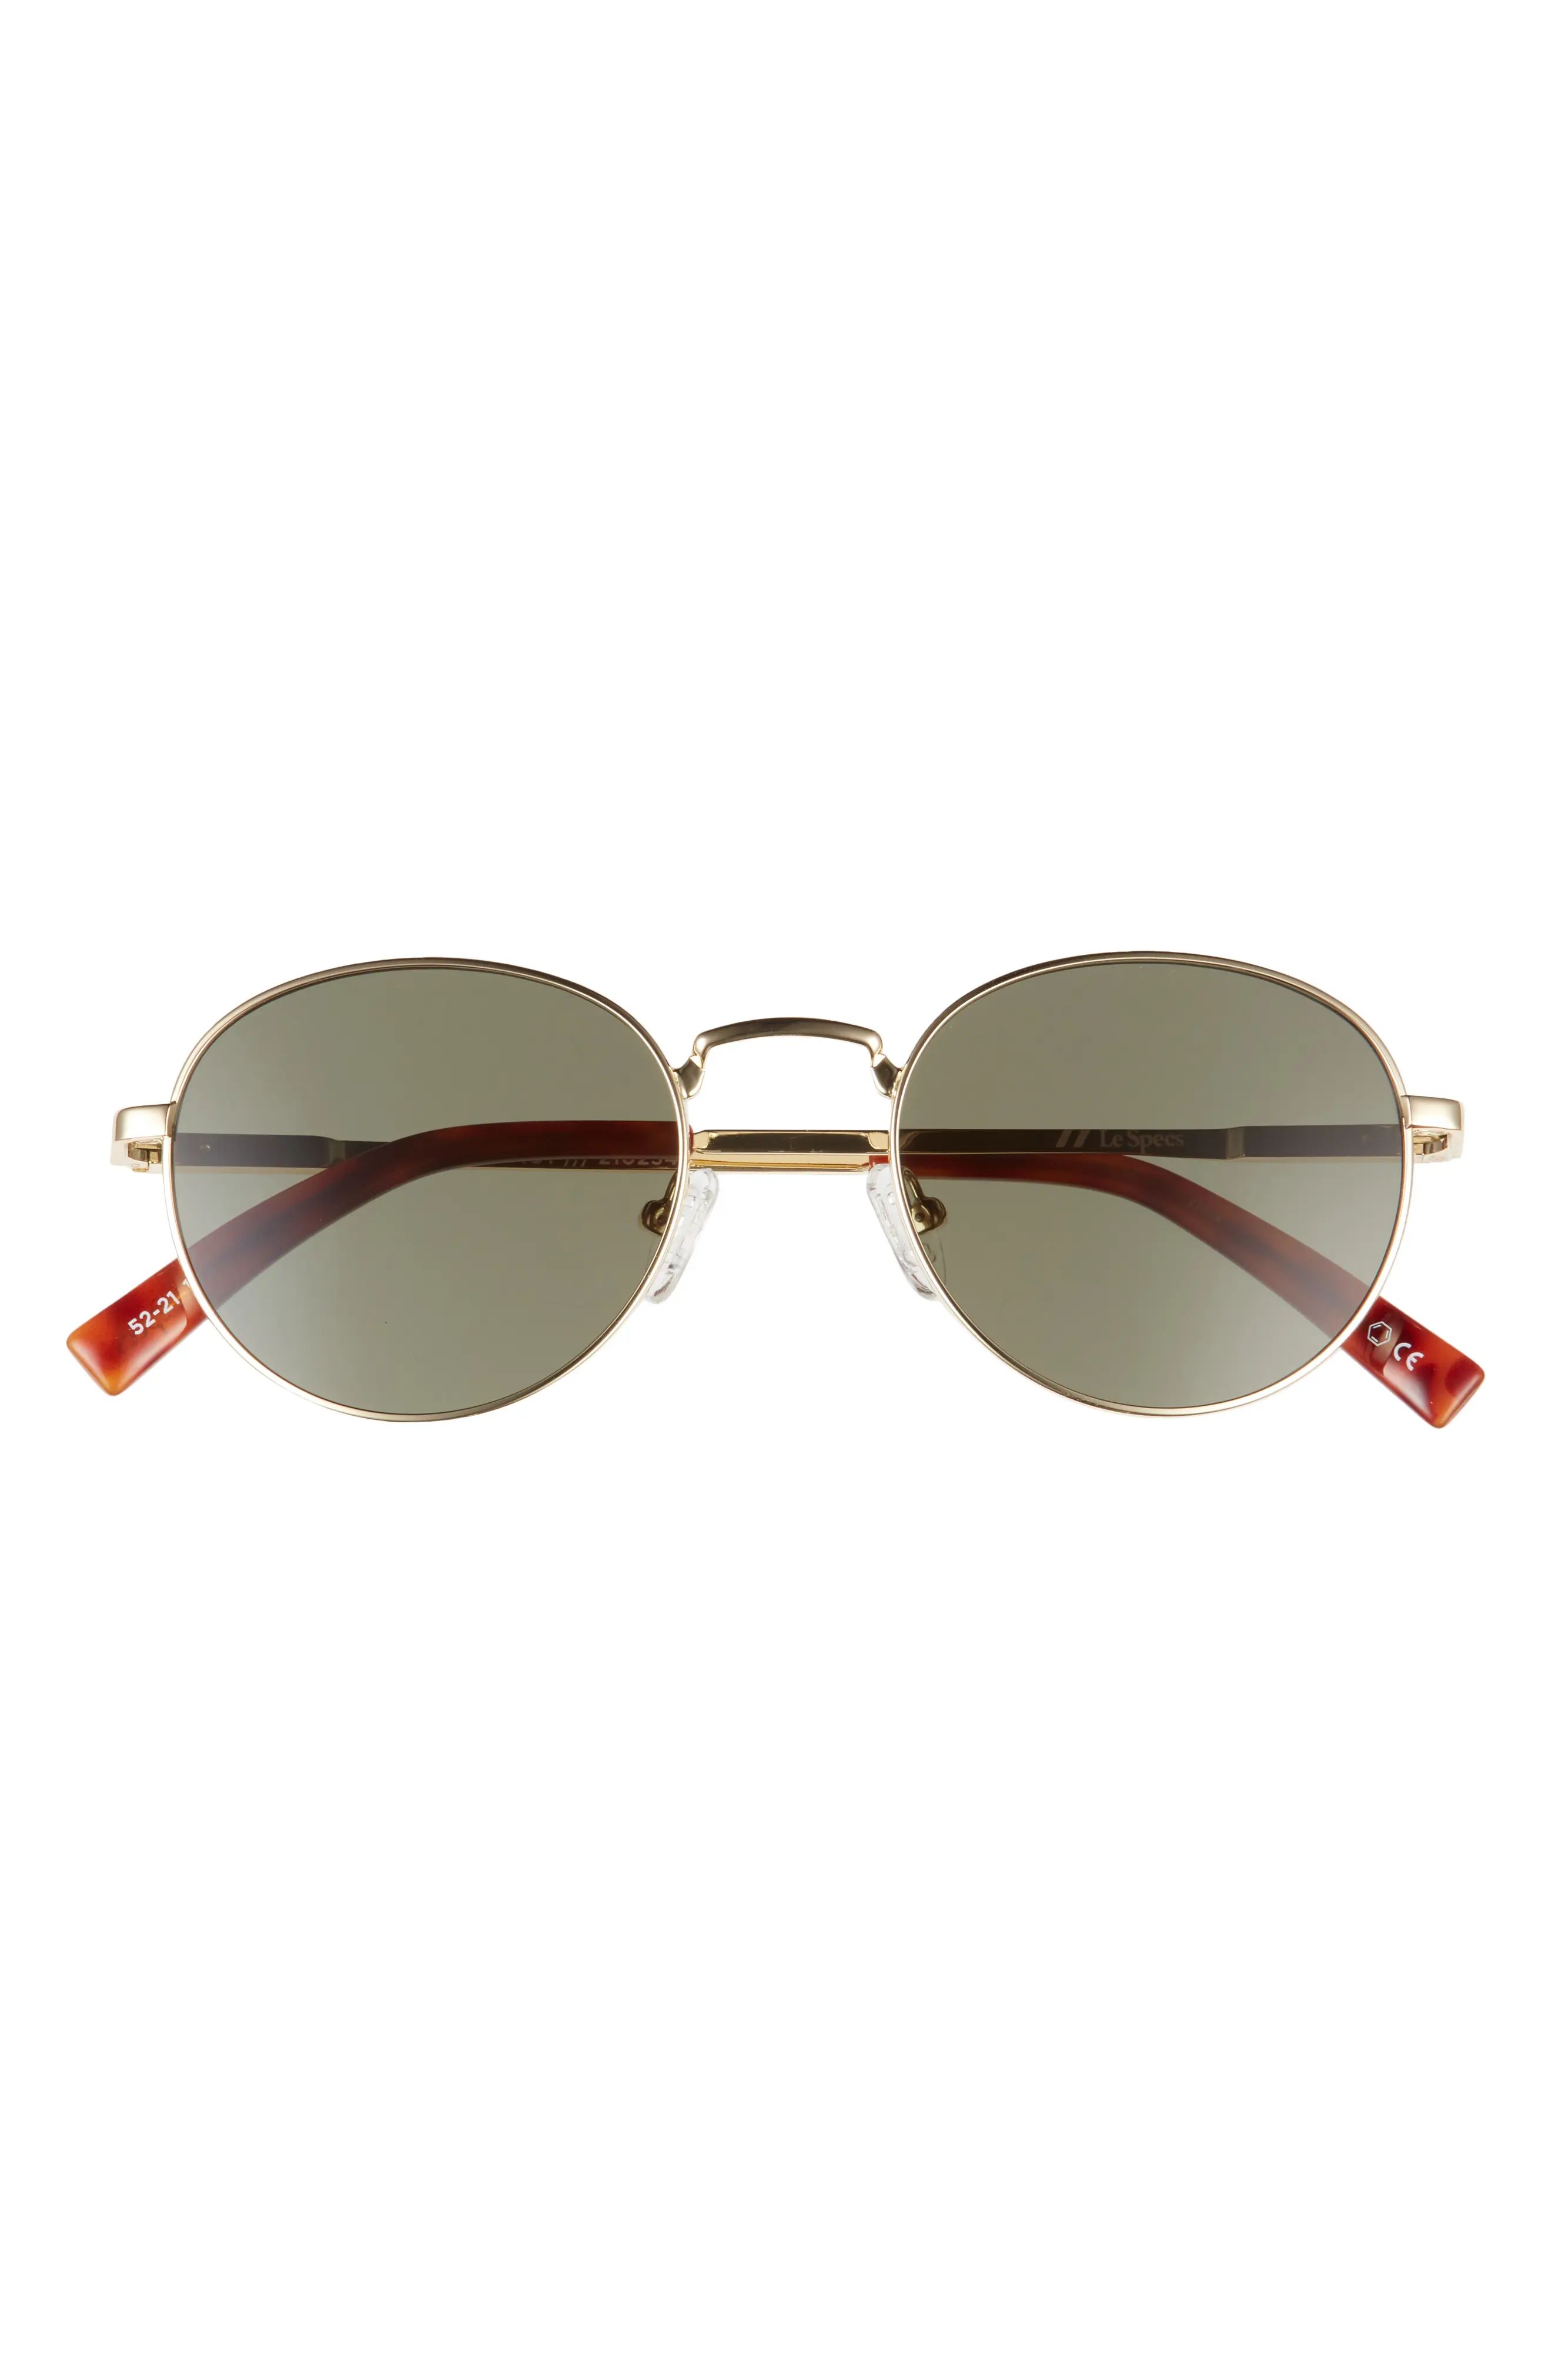 Le Specs Legacy 52mm Round Sunglasses in Gold/Green Mono at Nordstrom | Nordstrom